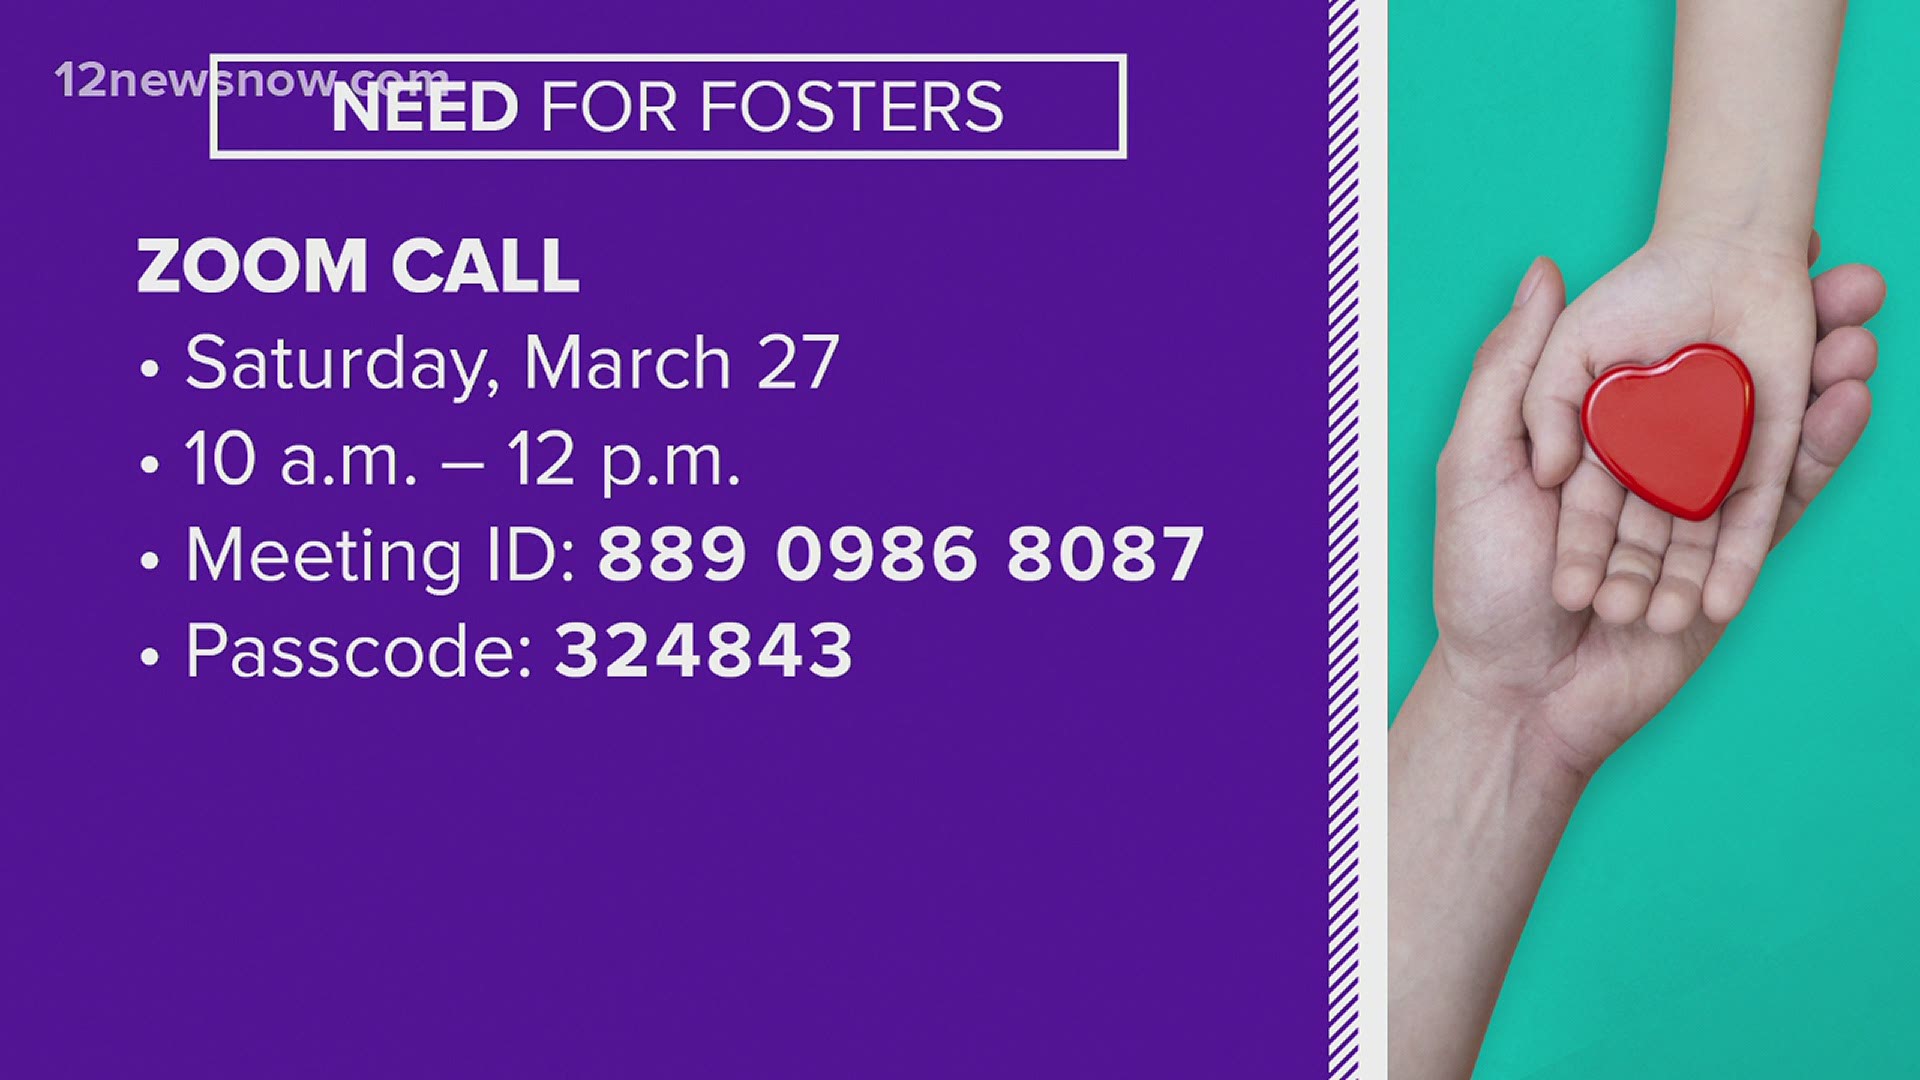 There are currently 336 kids in foster care in Jefferson County.